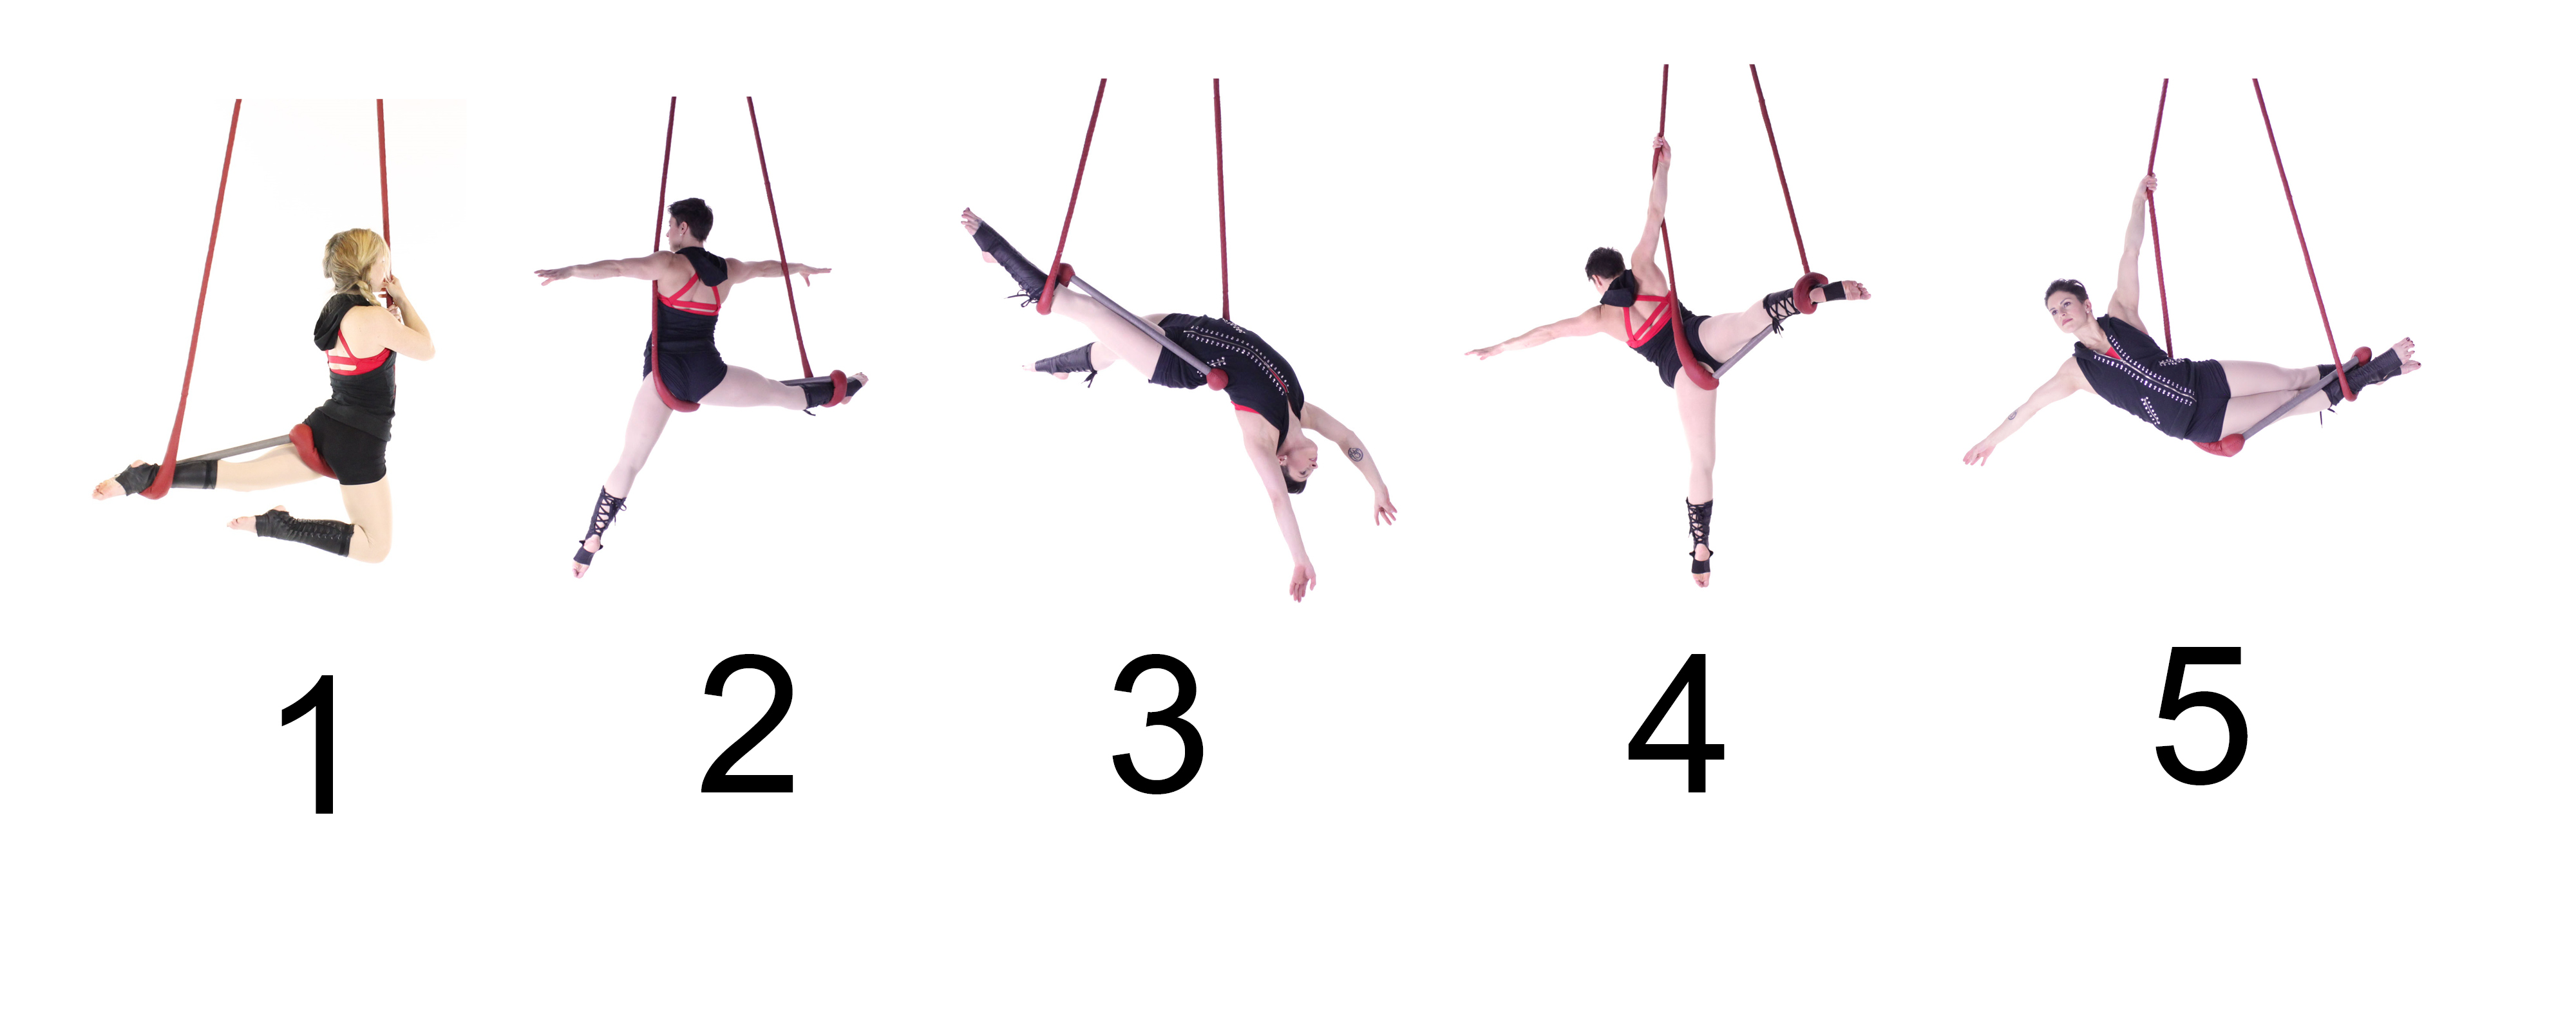 Trapeze Contributions by Guest Artist McKinley Vitale www.aerialdancing